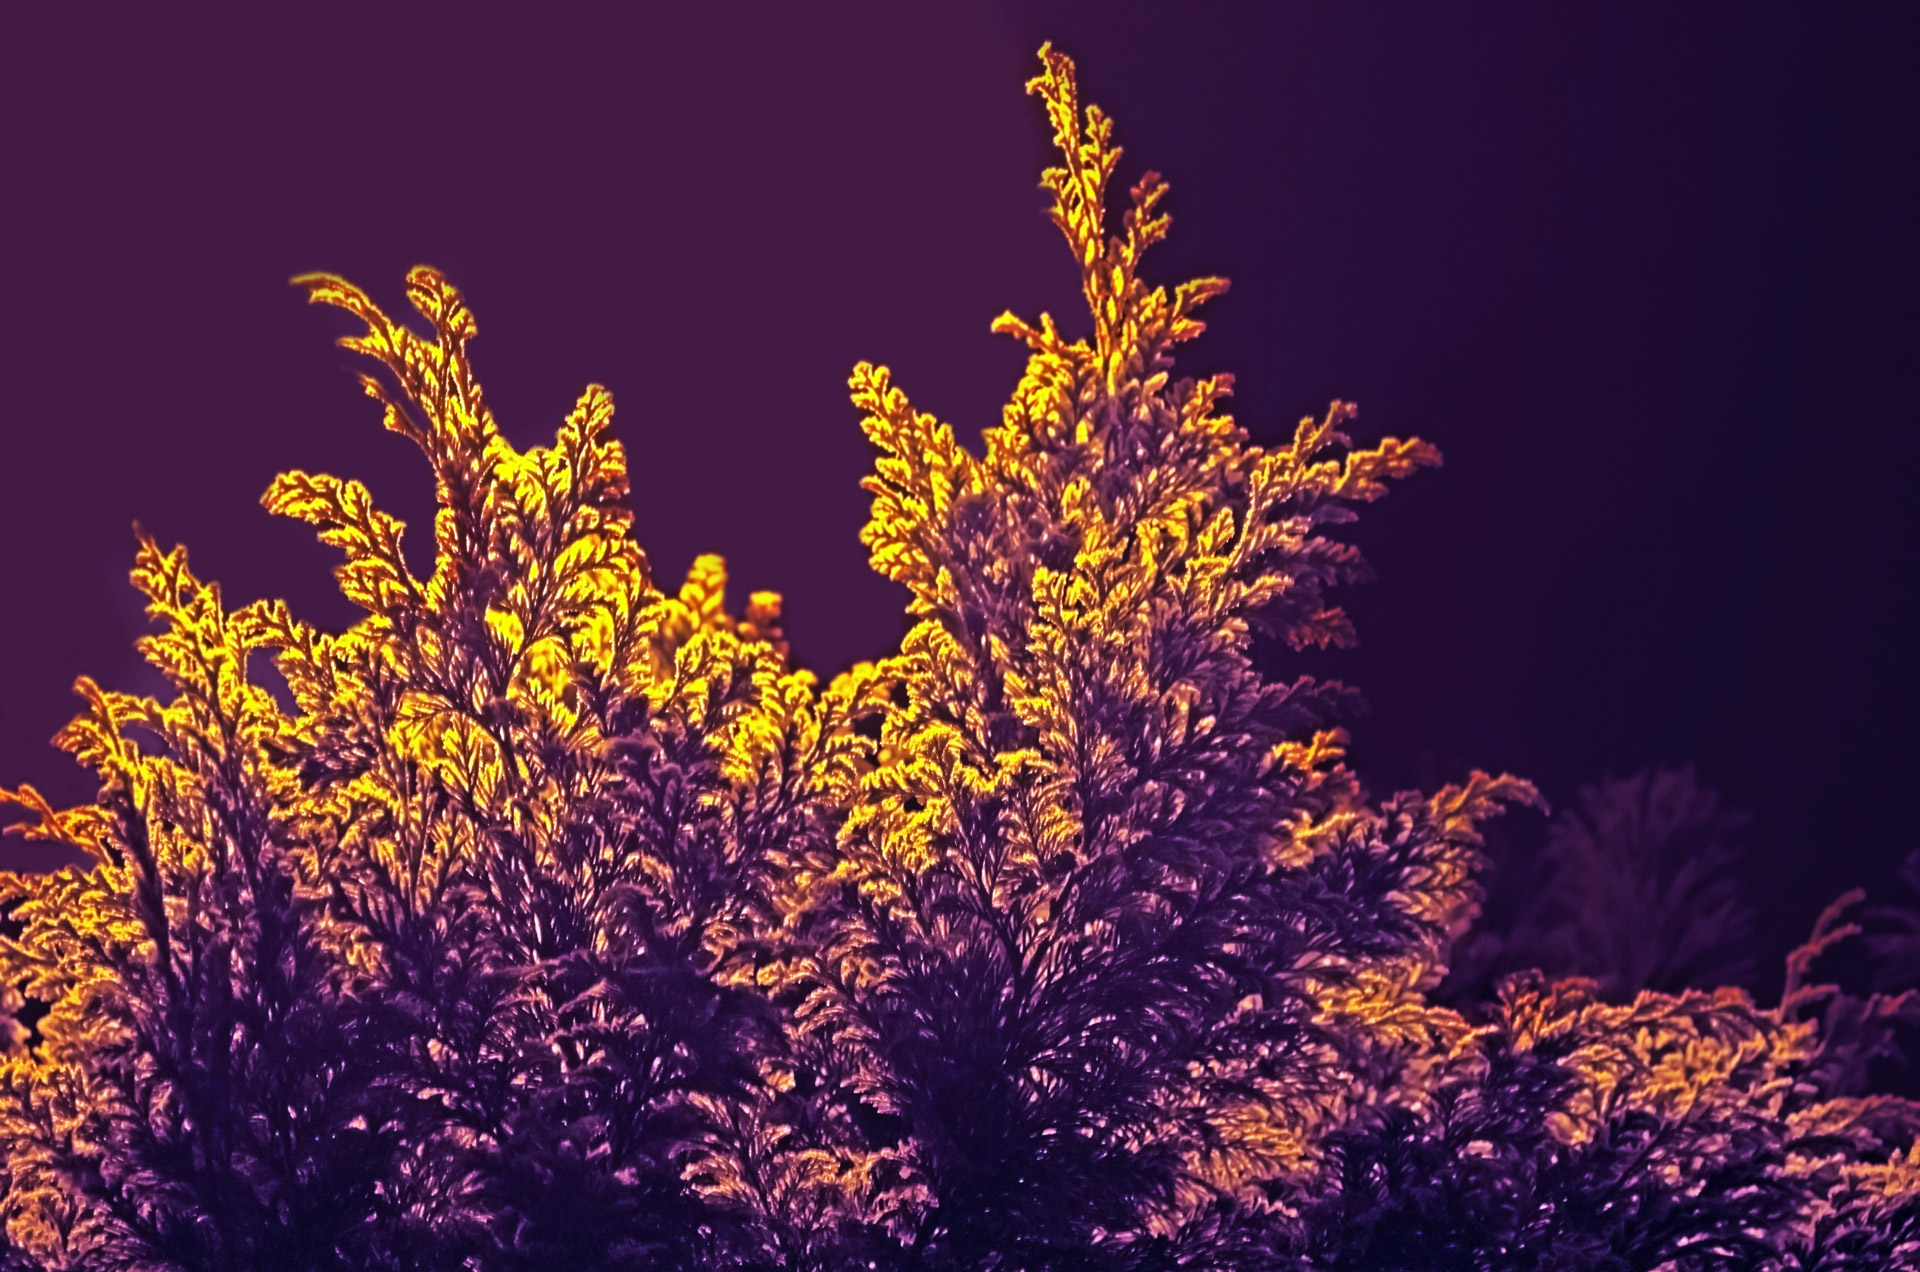 abstract shrubbery decorations free photo